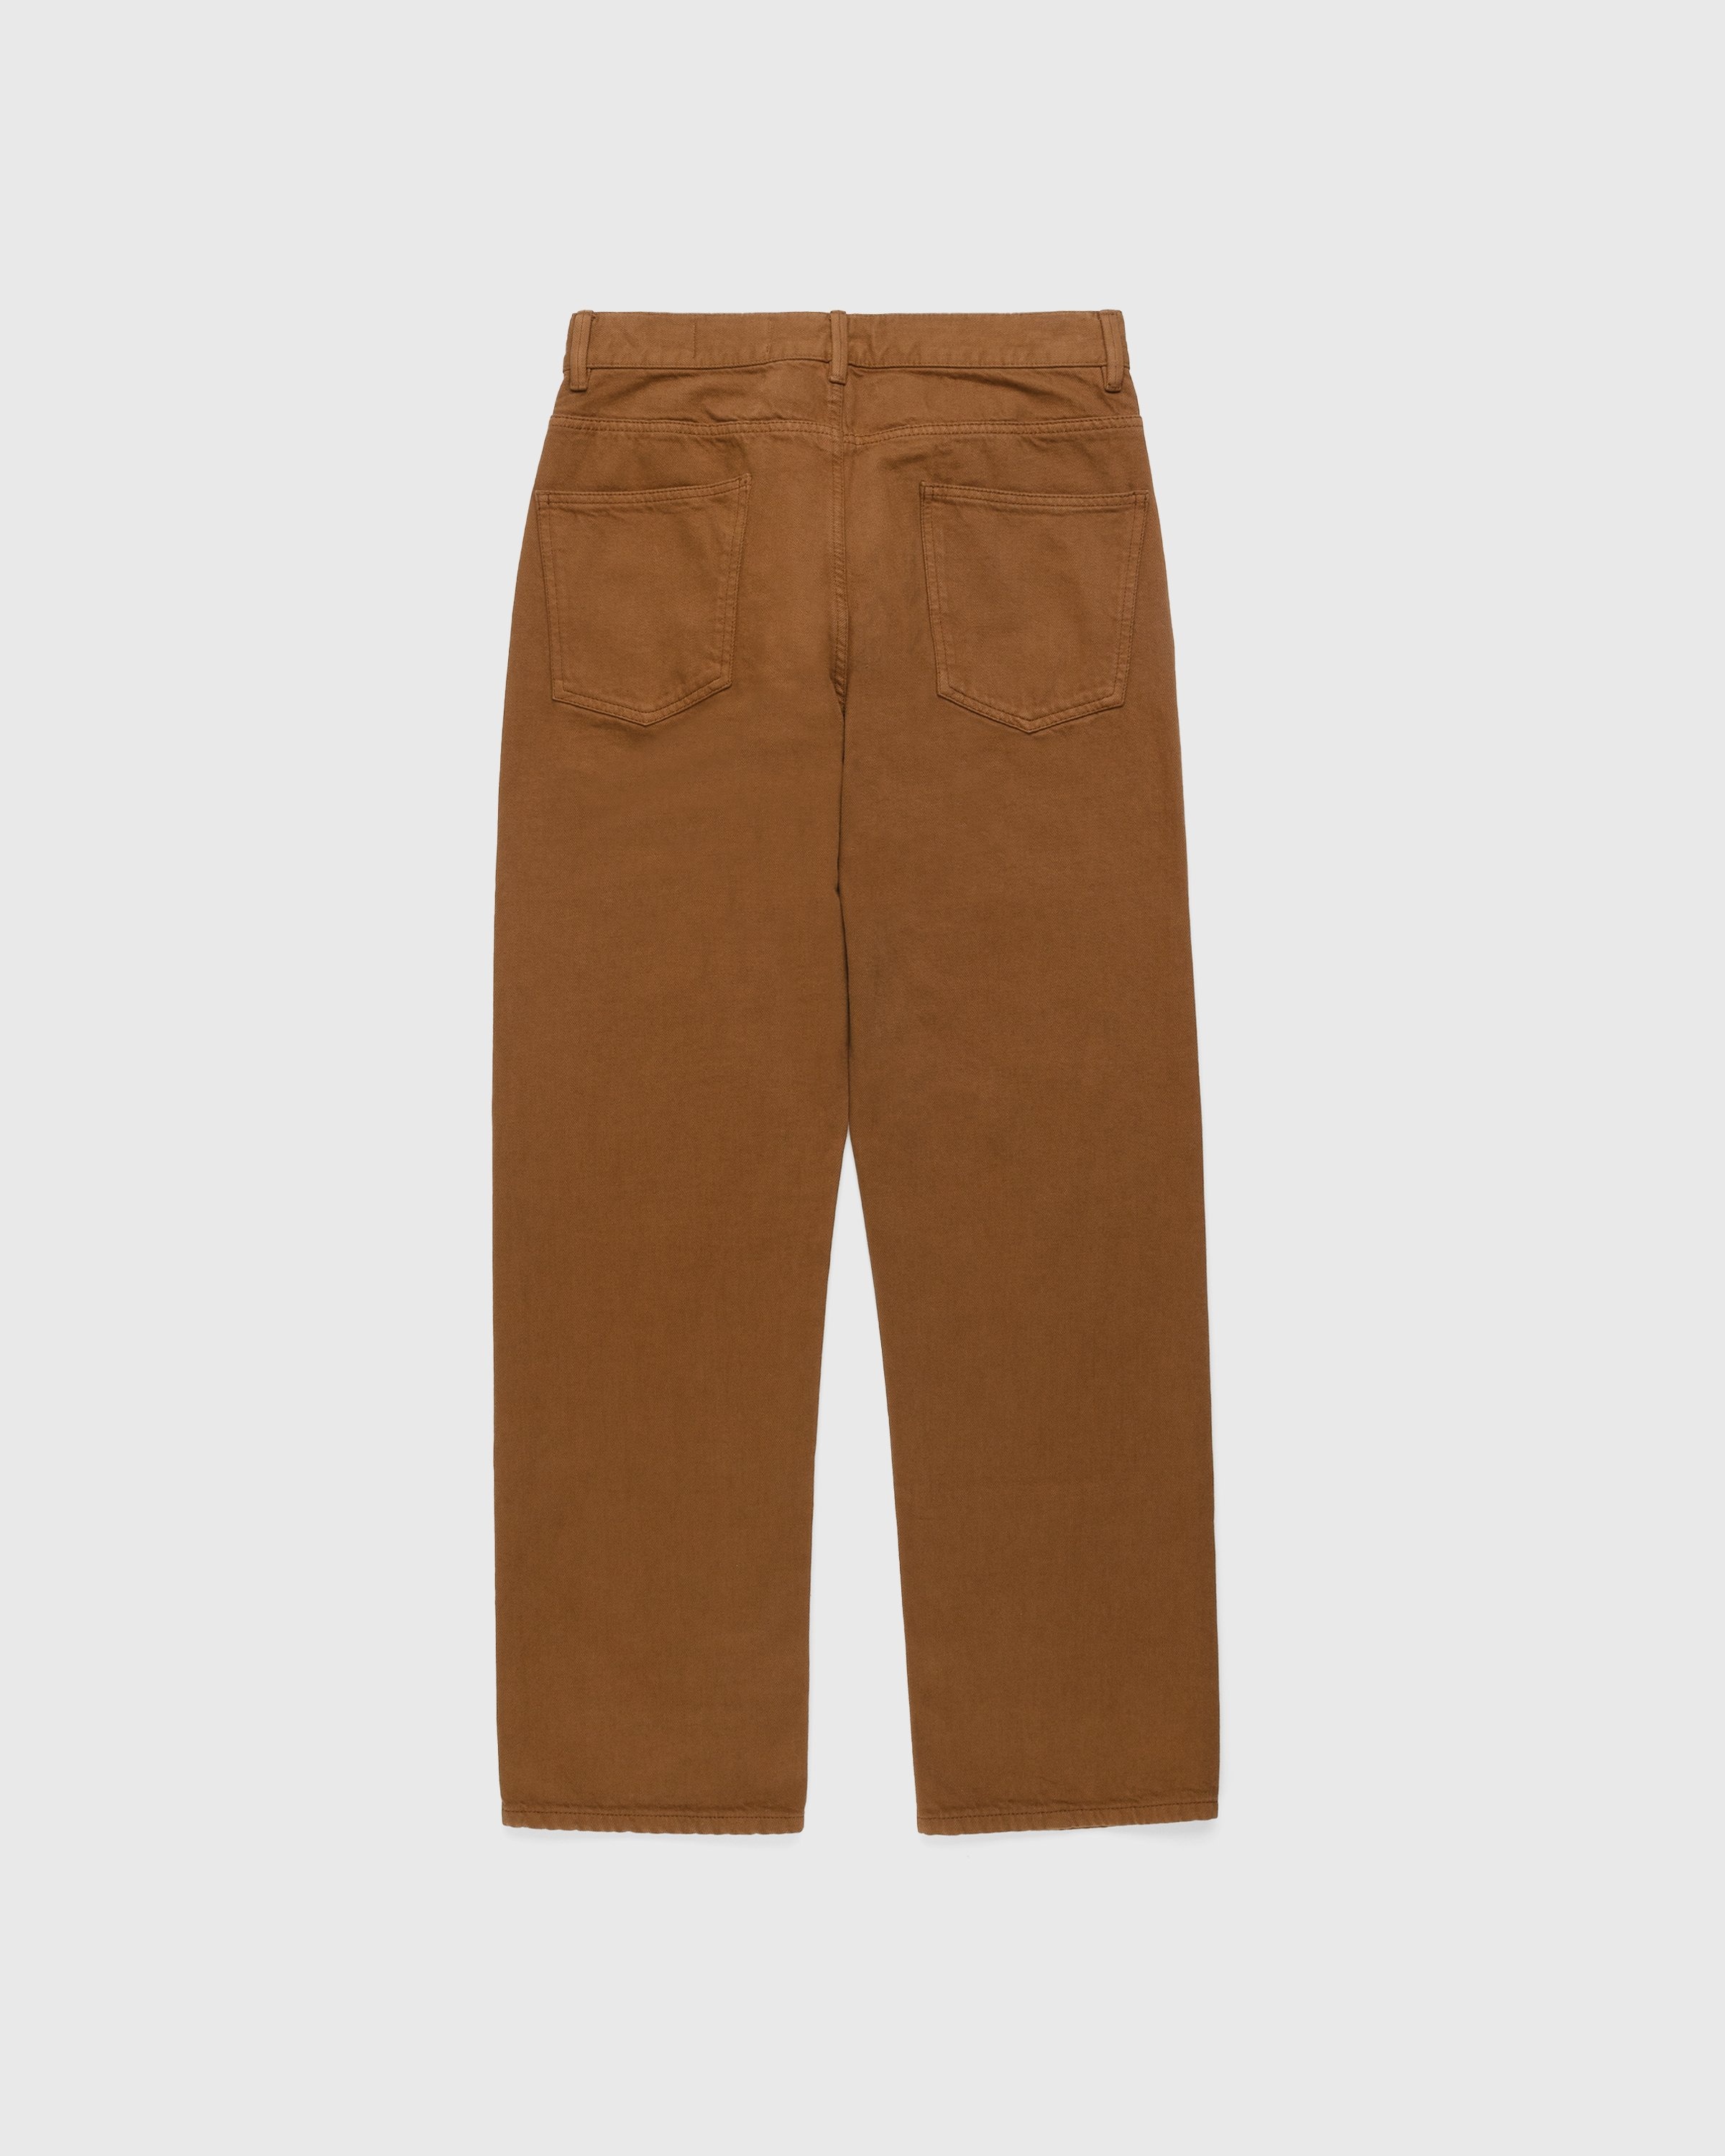 Lemaire – Seamless Jeans Brown - Pants - Brown - Image 2